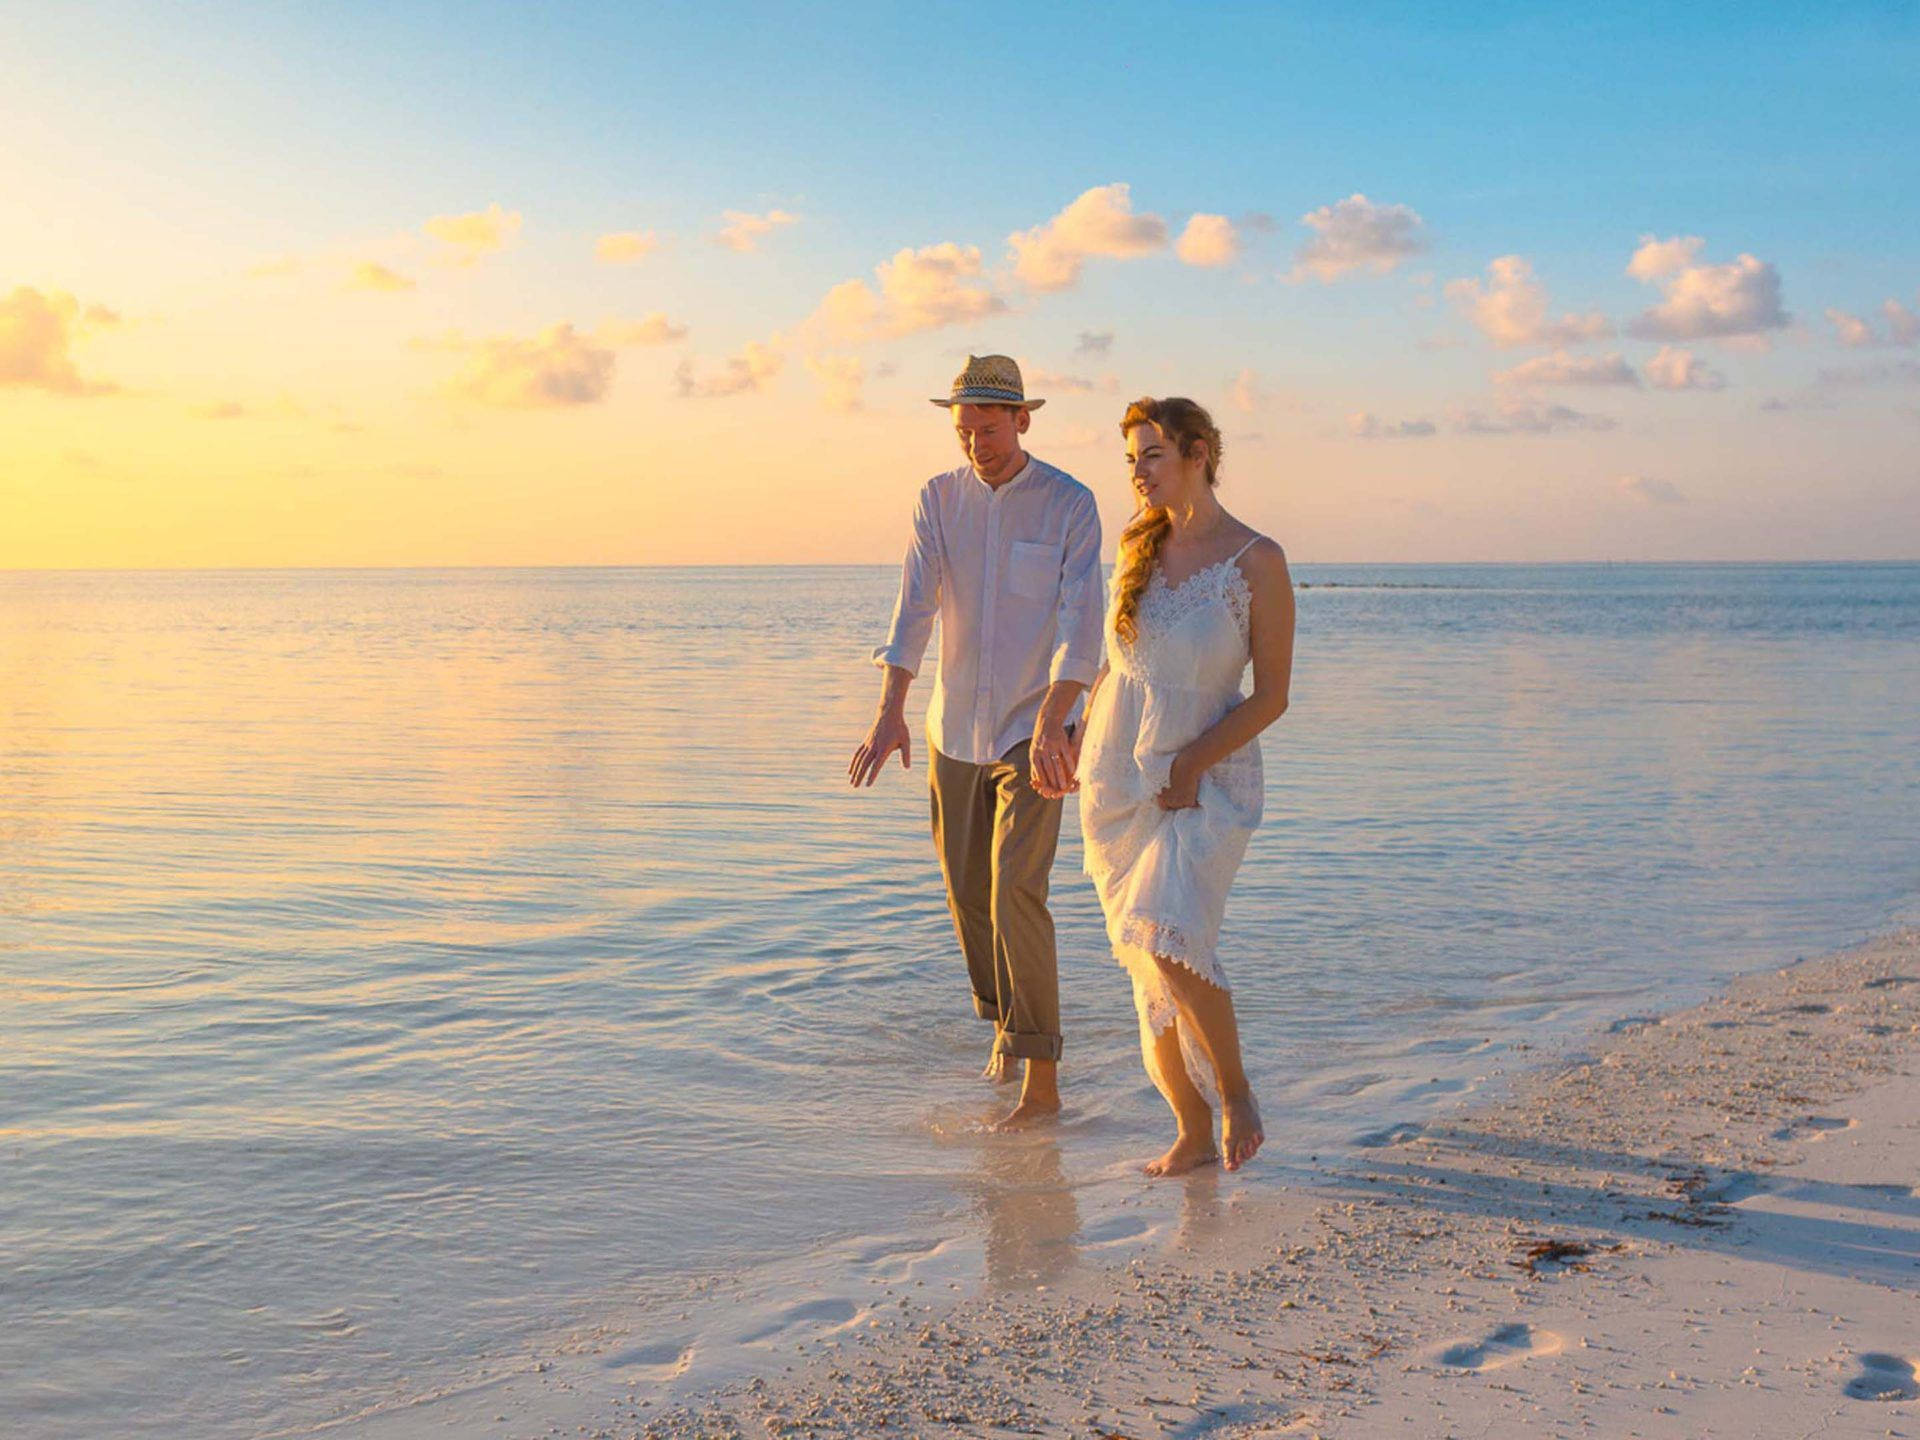 "romantic Getaway: A Couple's Tranquil Moment On The Beach" Wallpaper